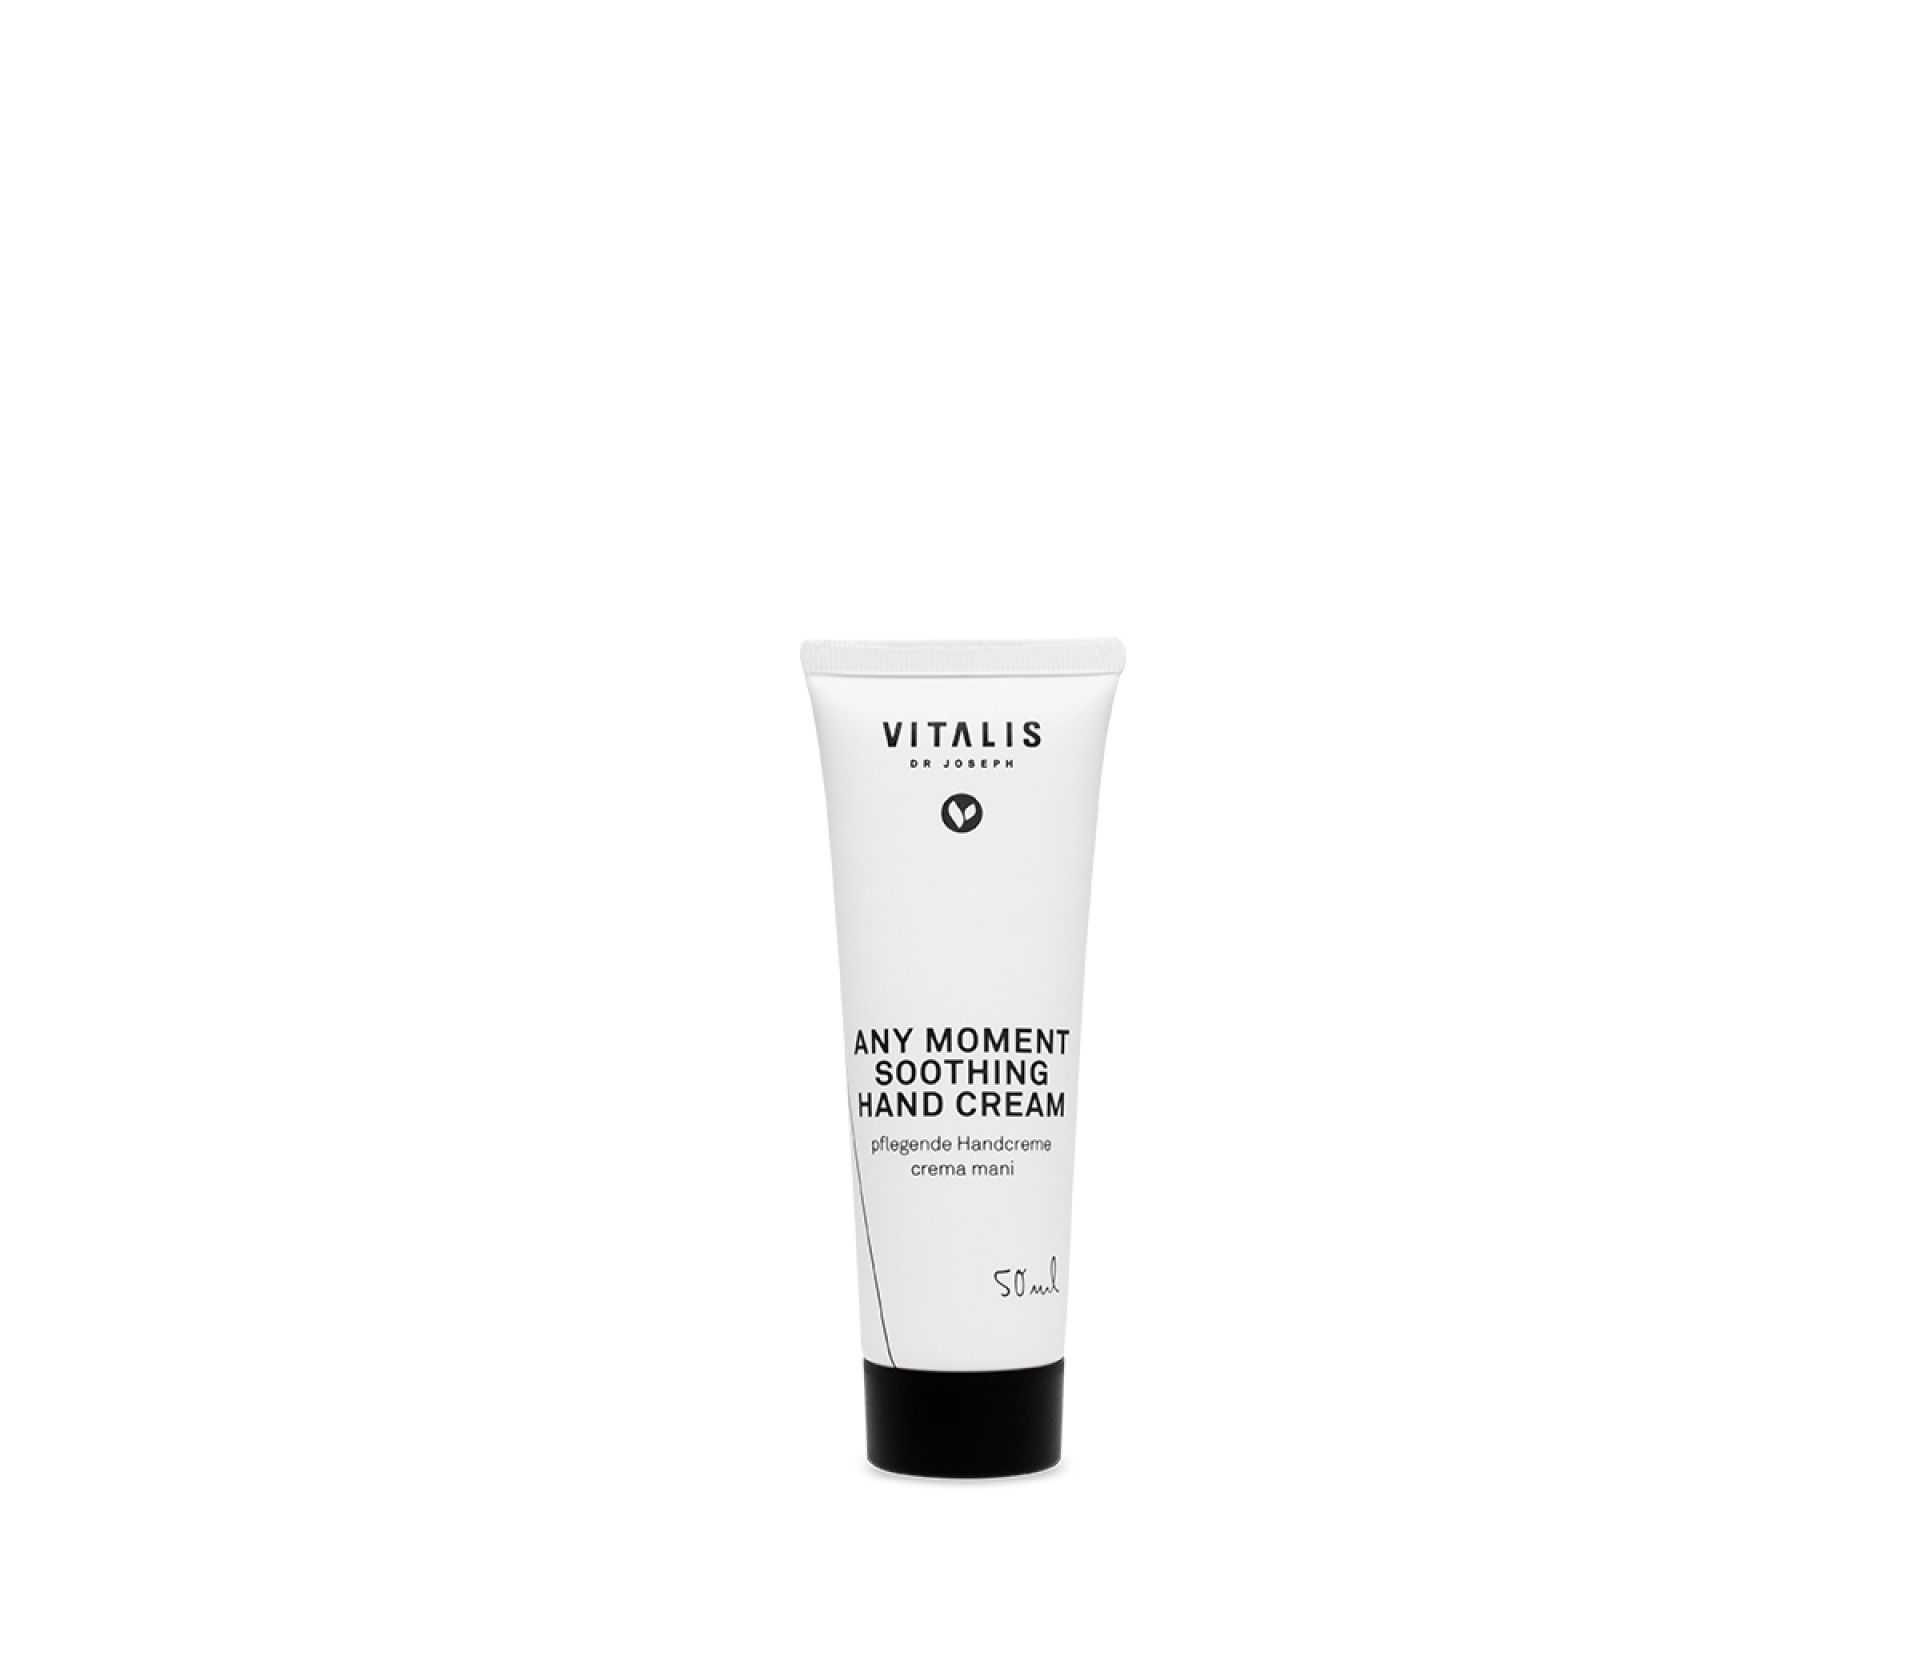 VITALIS Any Moment soothing Hand Cream 